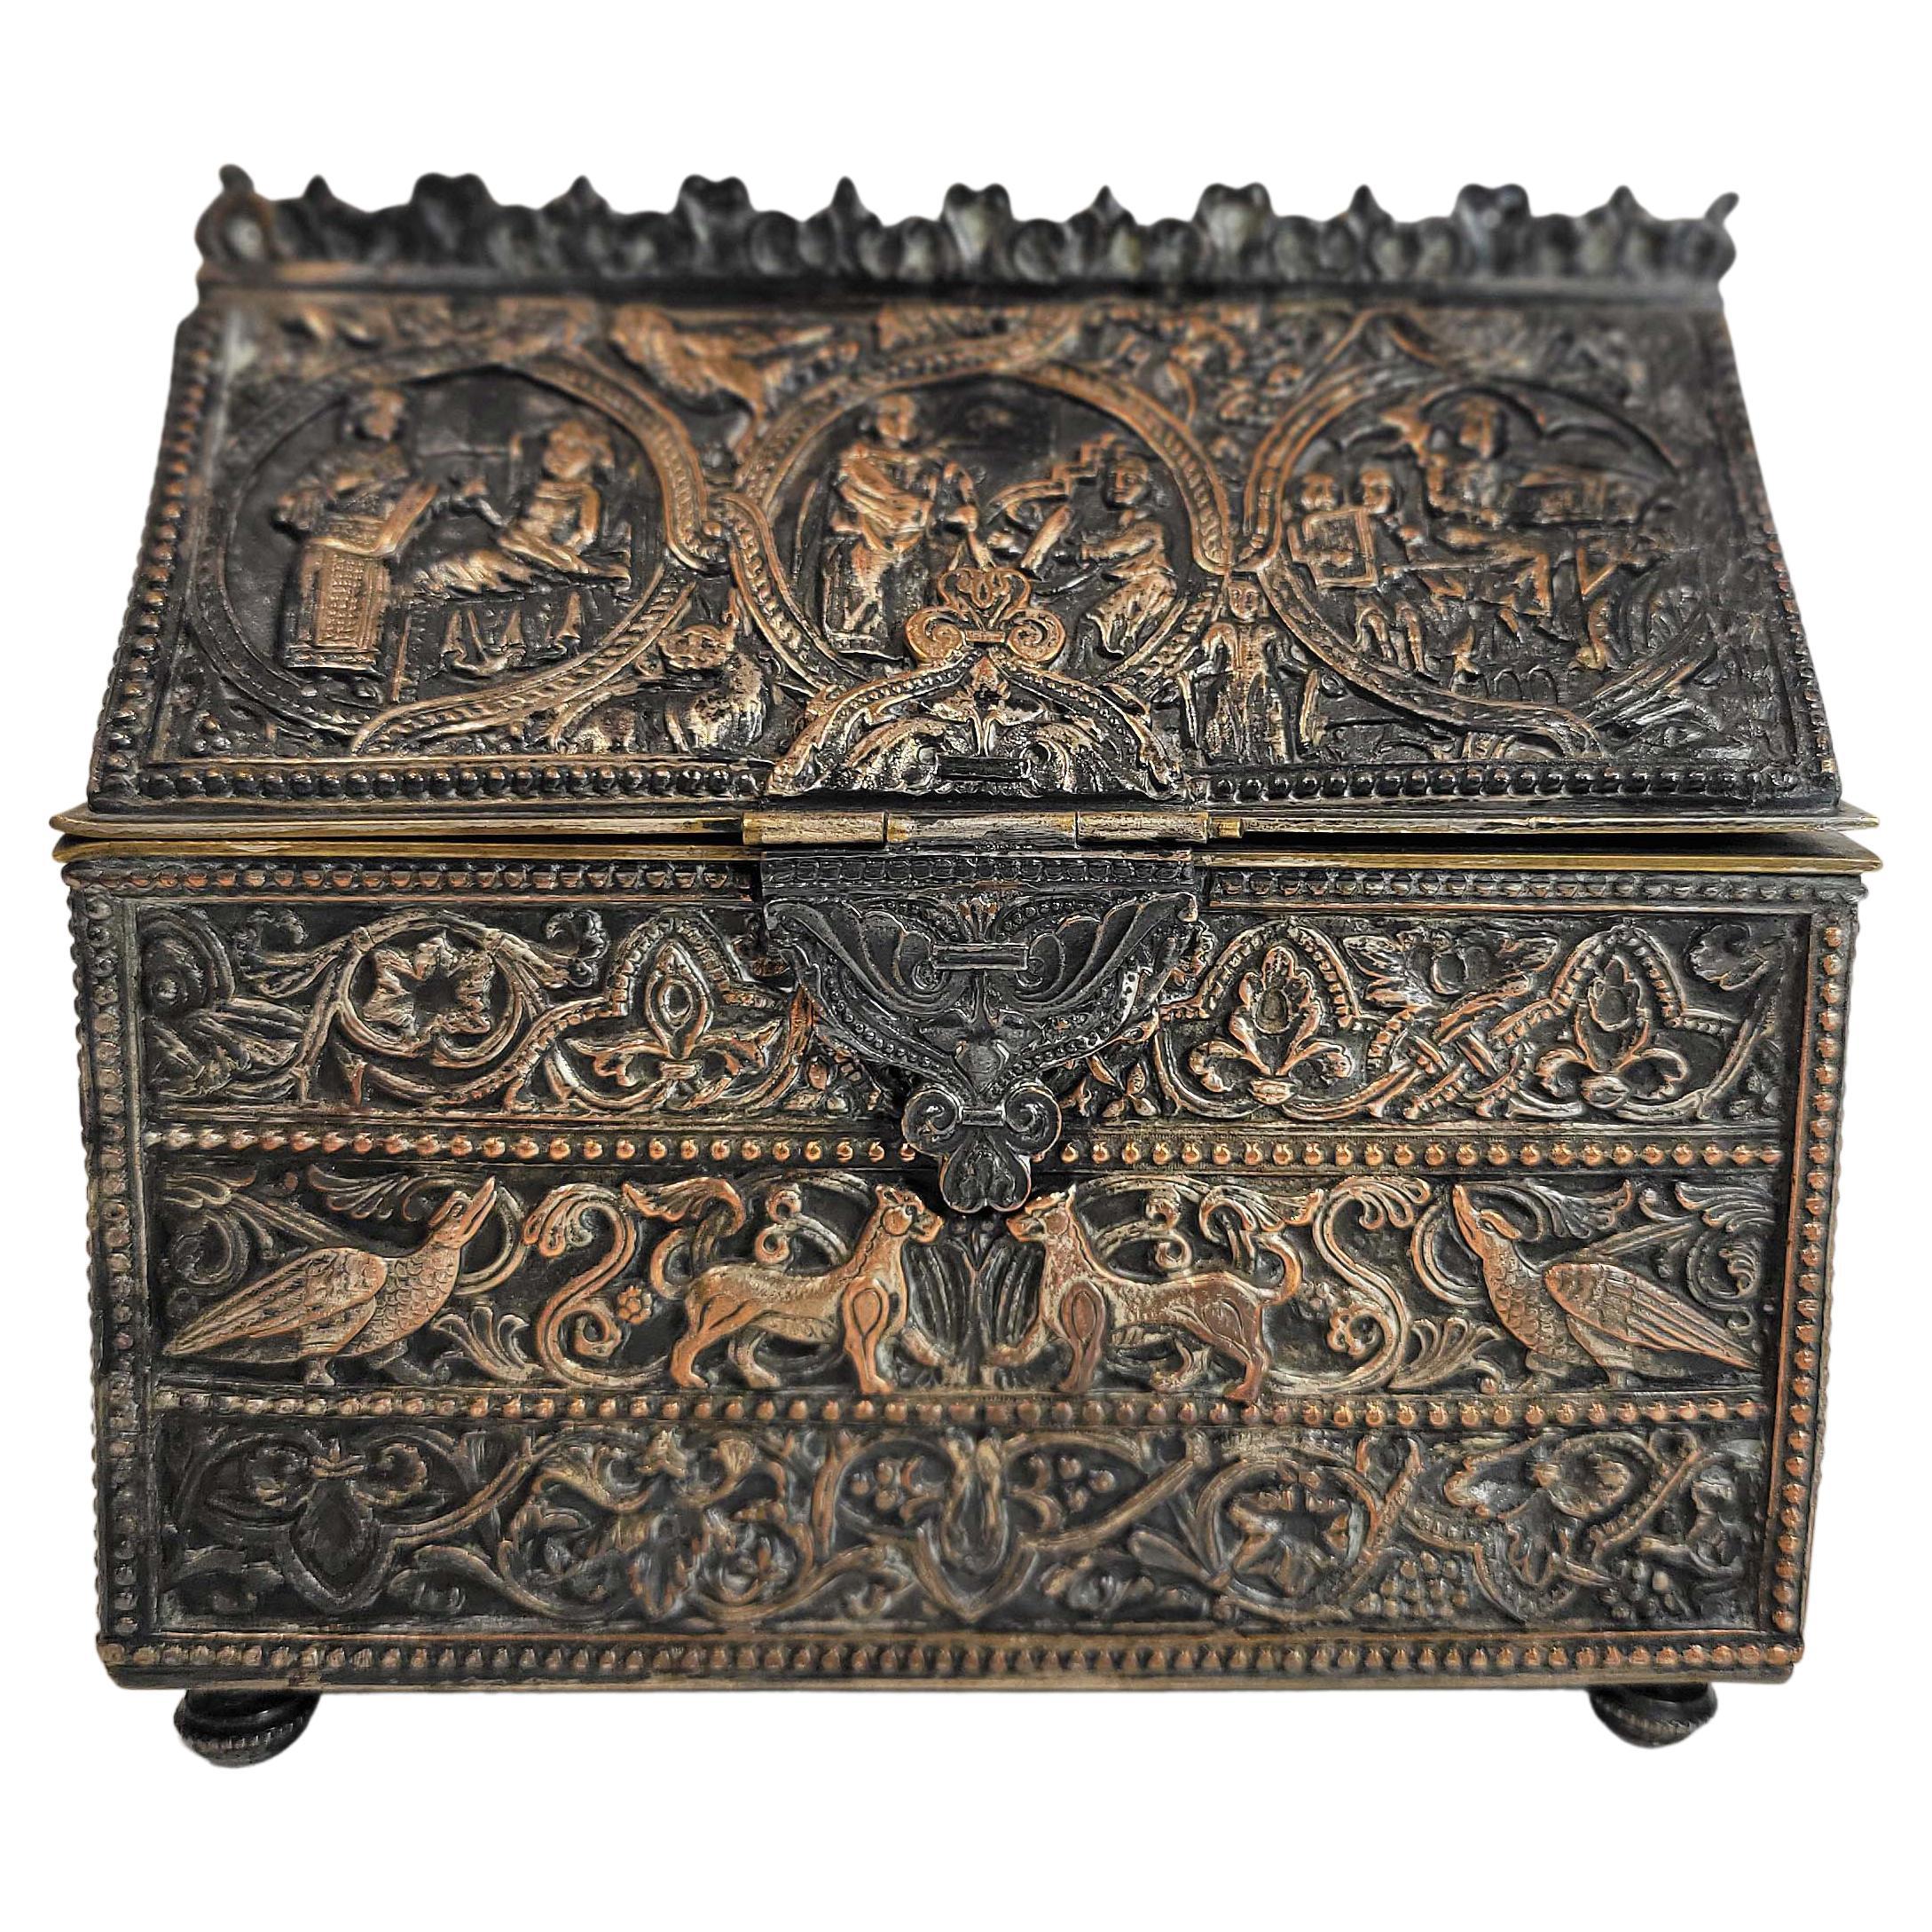 French Gothic Revival Cigar Box Casket 19C.